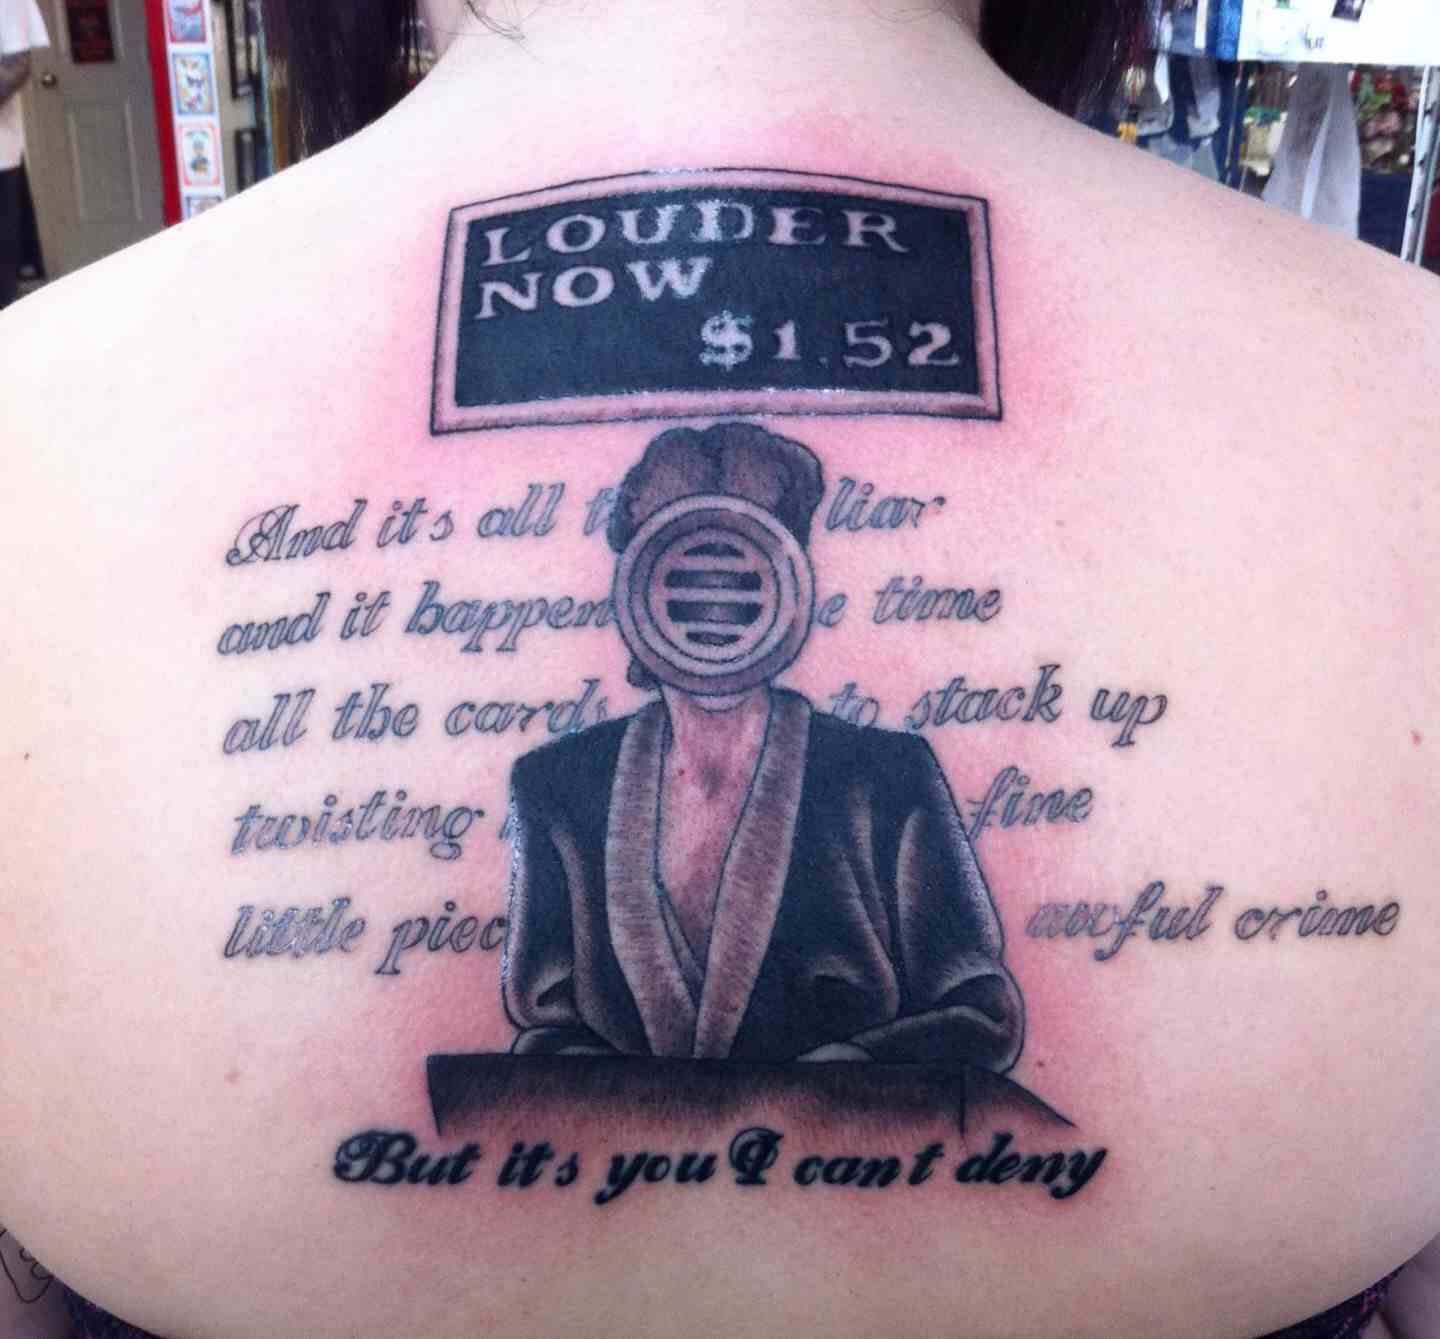 louder now tattoo